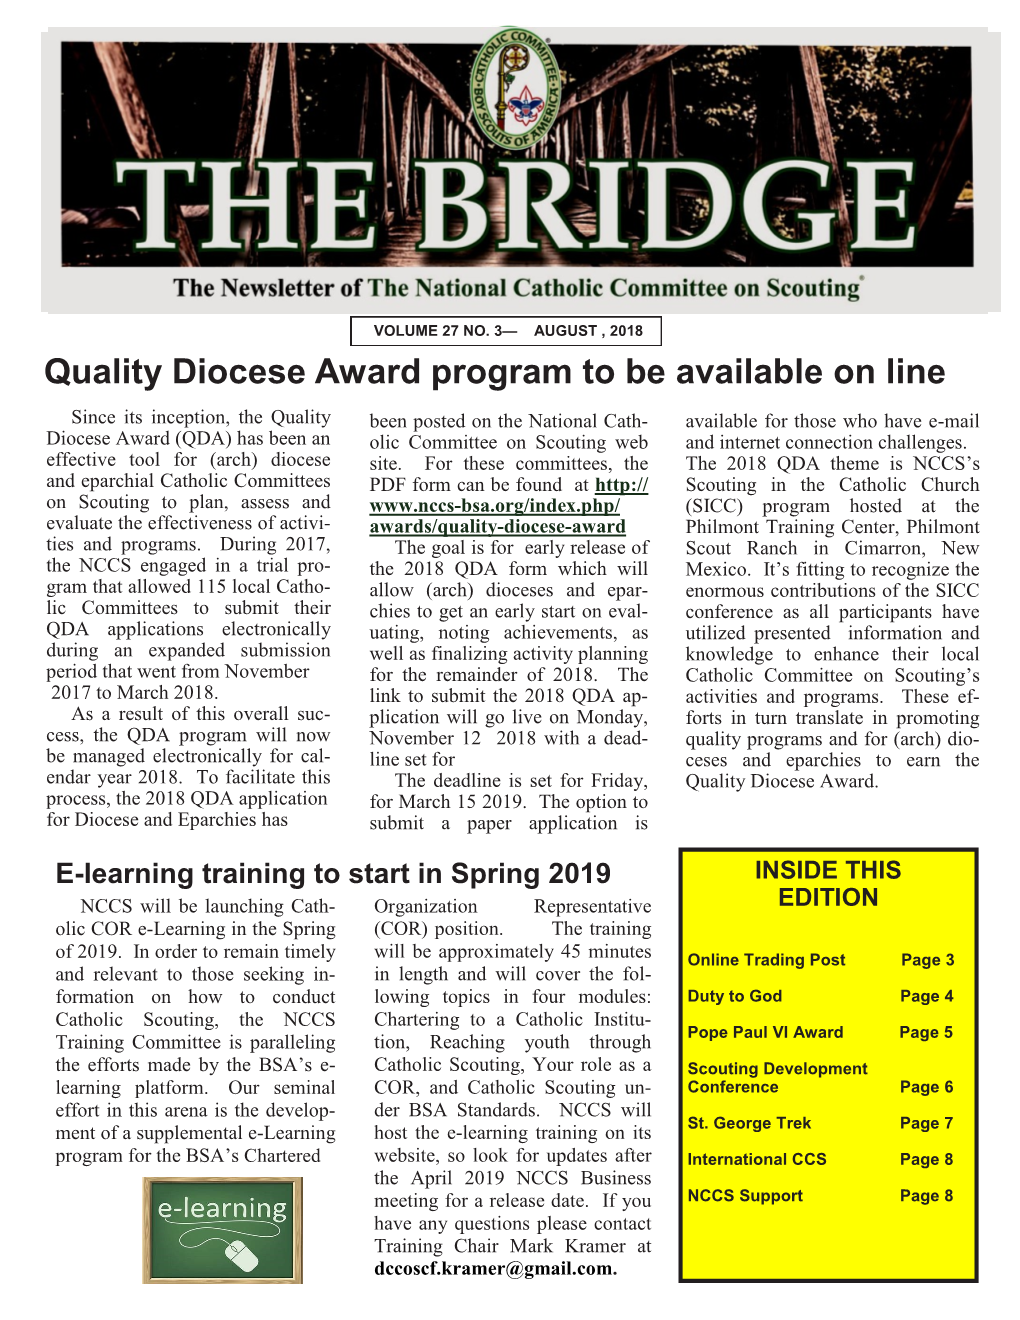 Quality Diocese Award Program to Be Available on Line